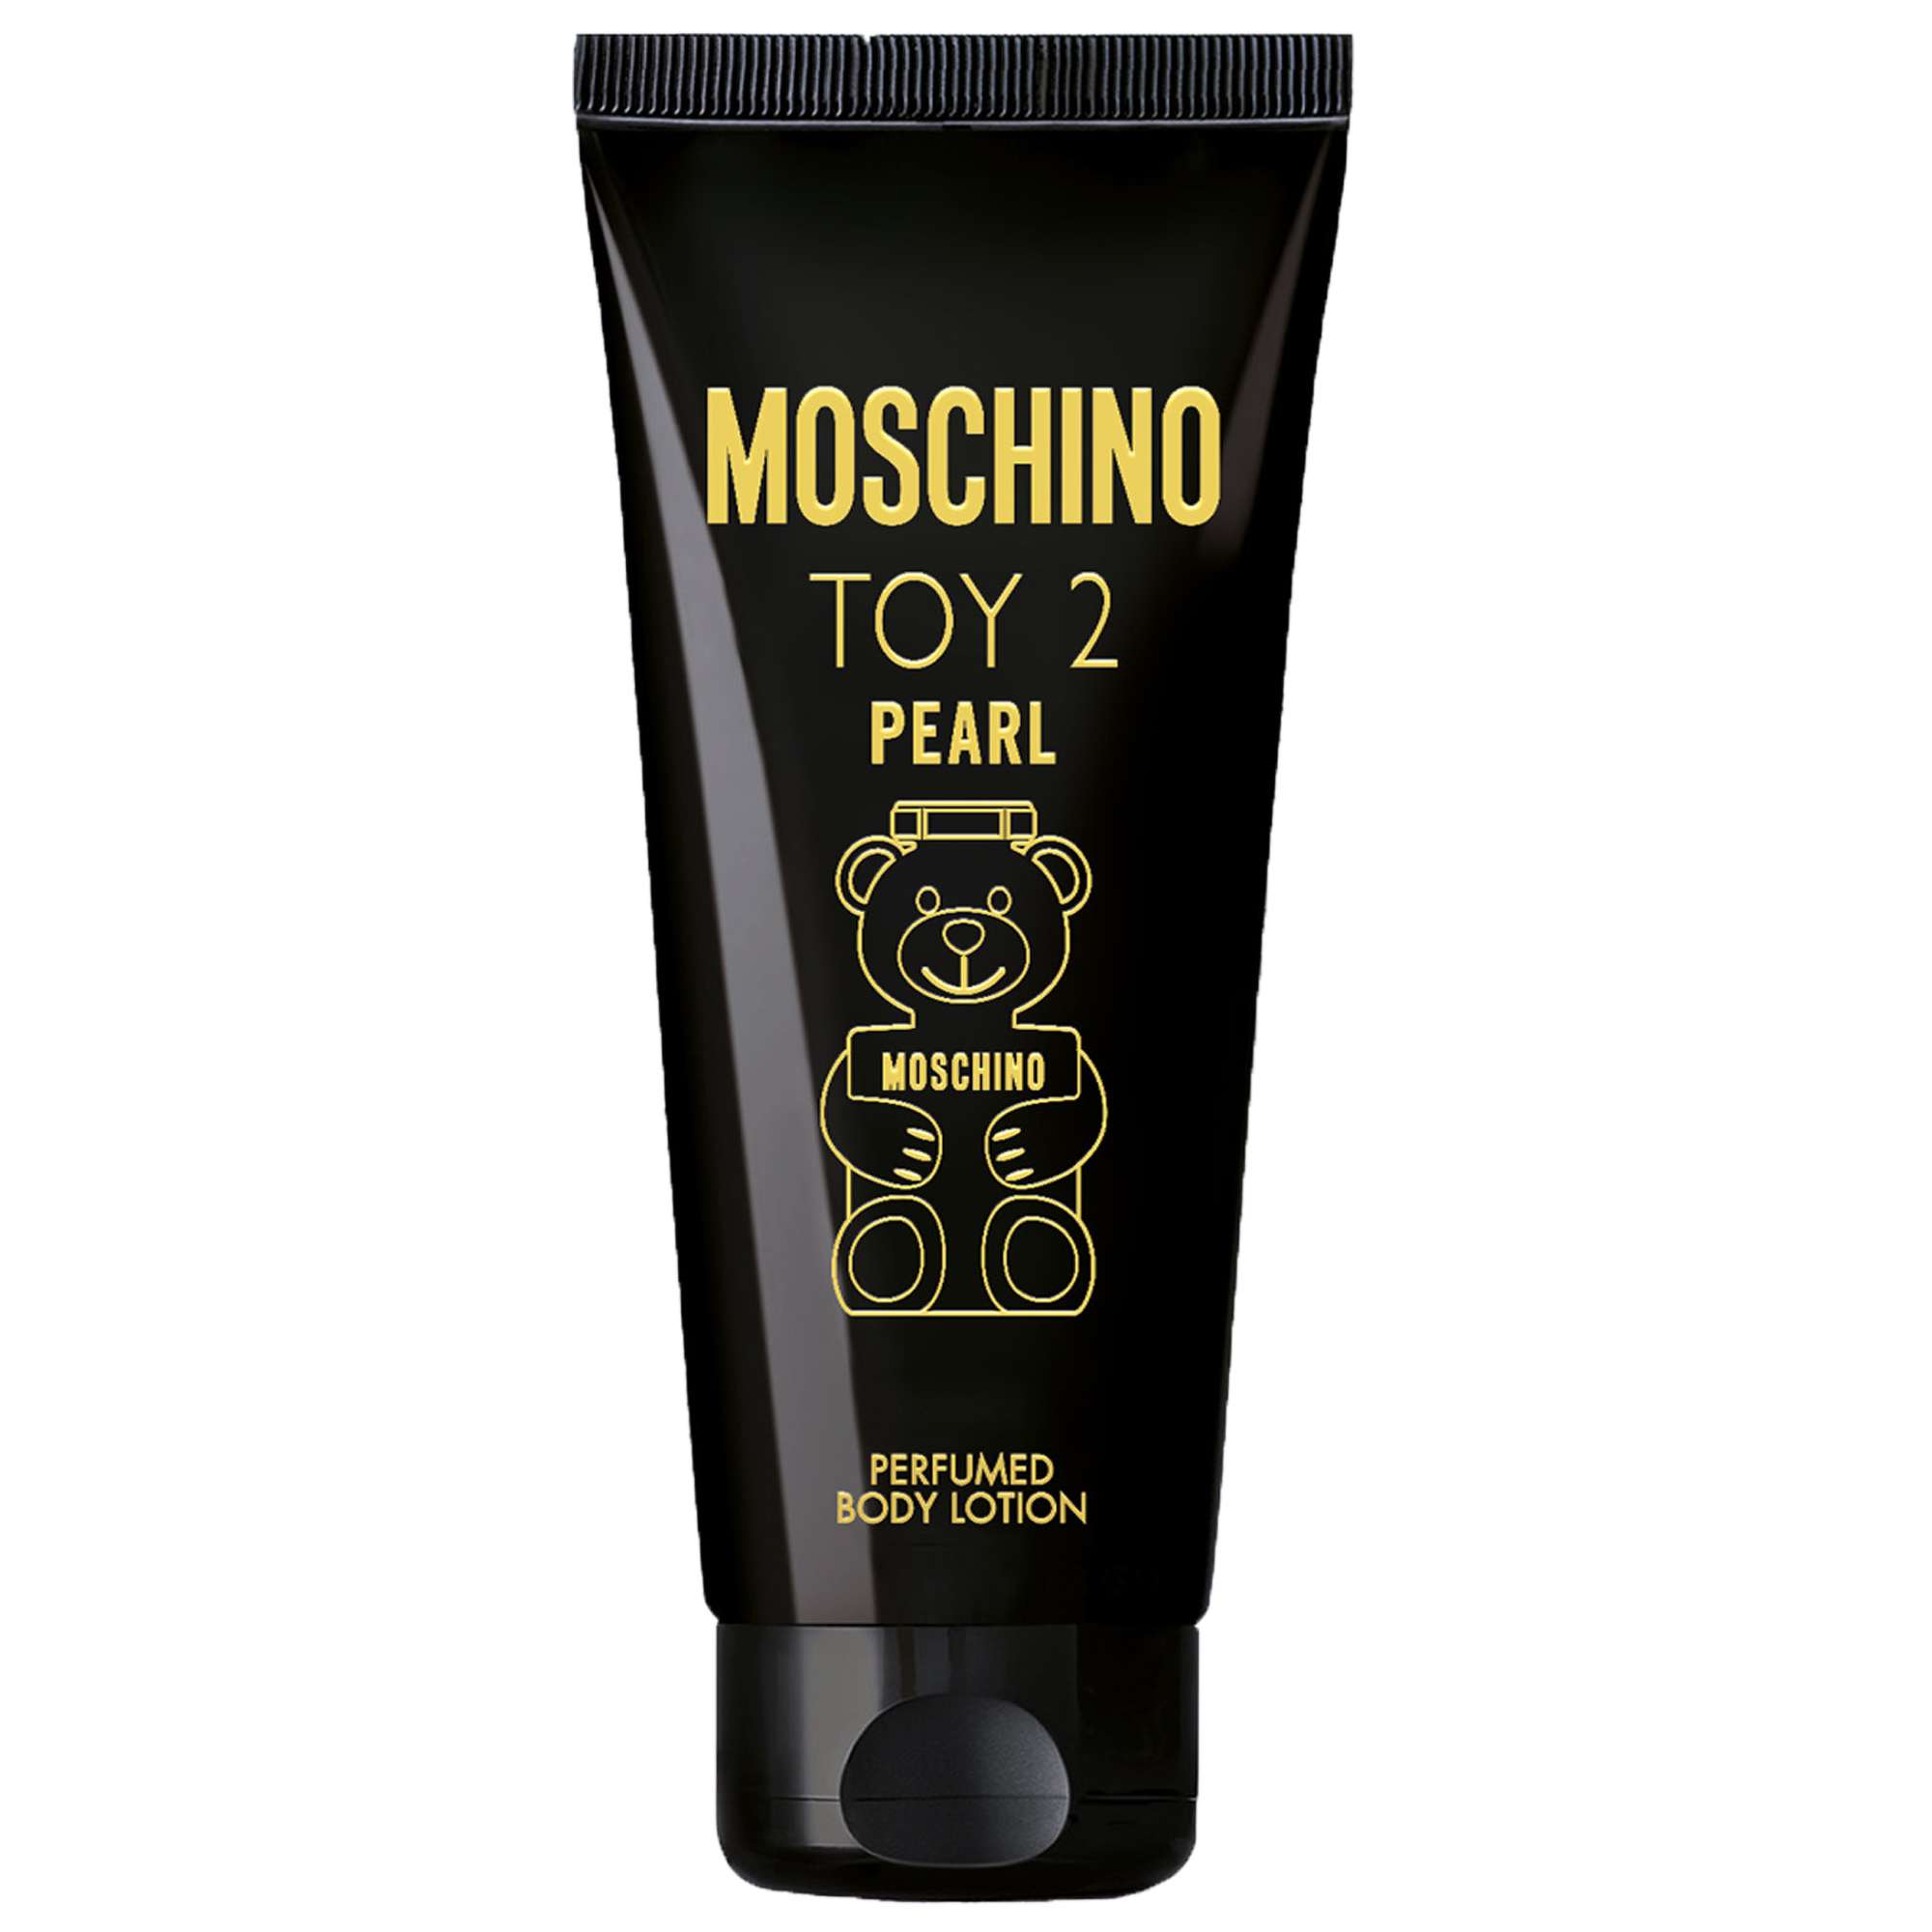 Image of Moschino Toy 2 Pearl Body Lotion 200ml